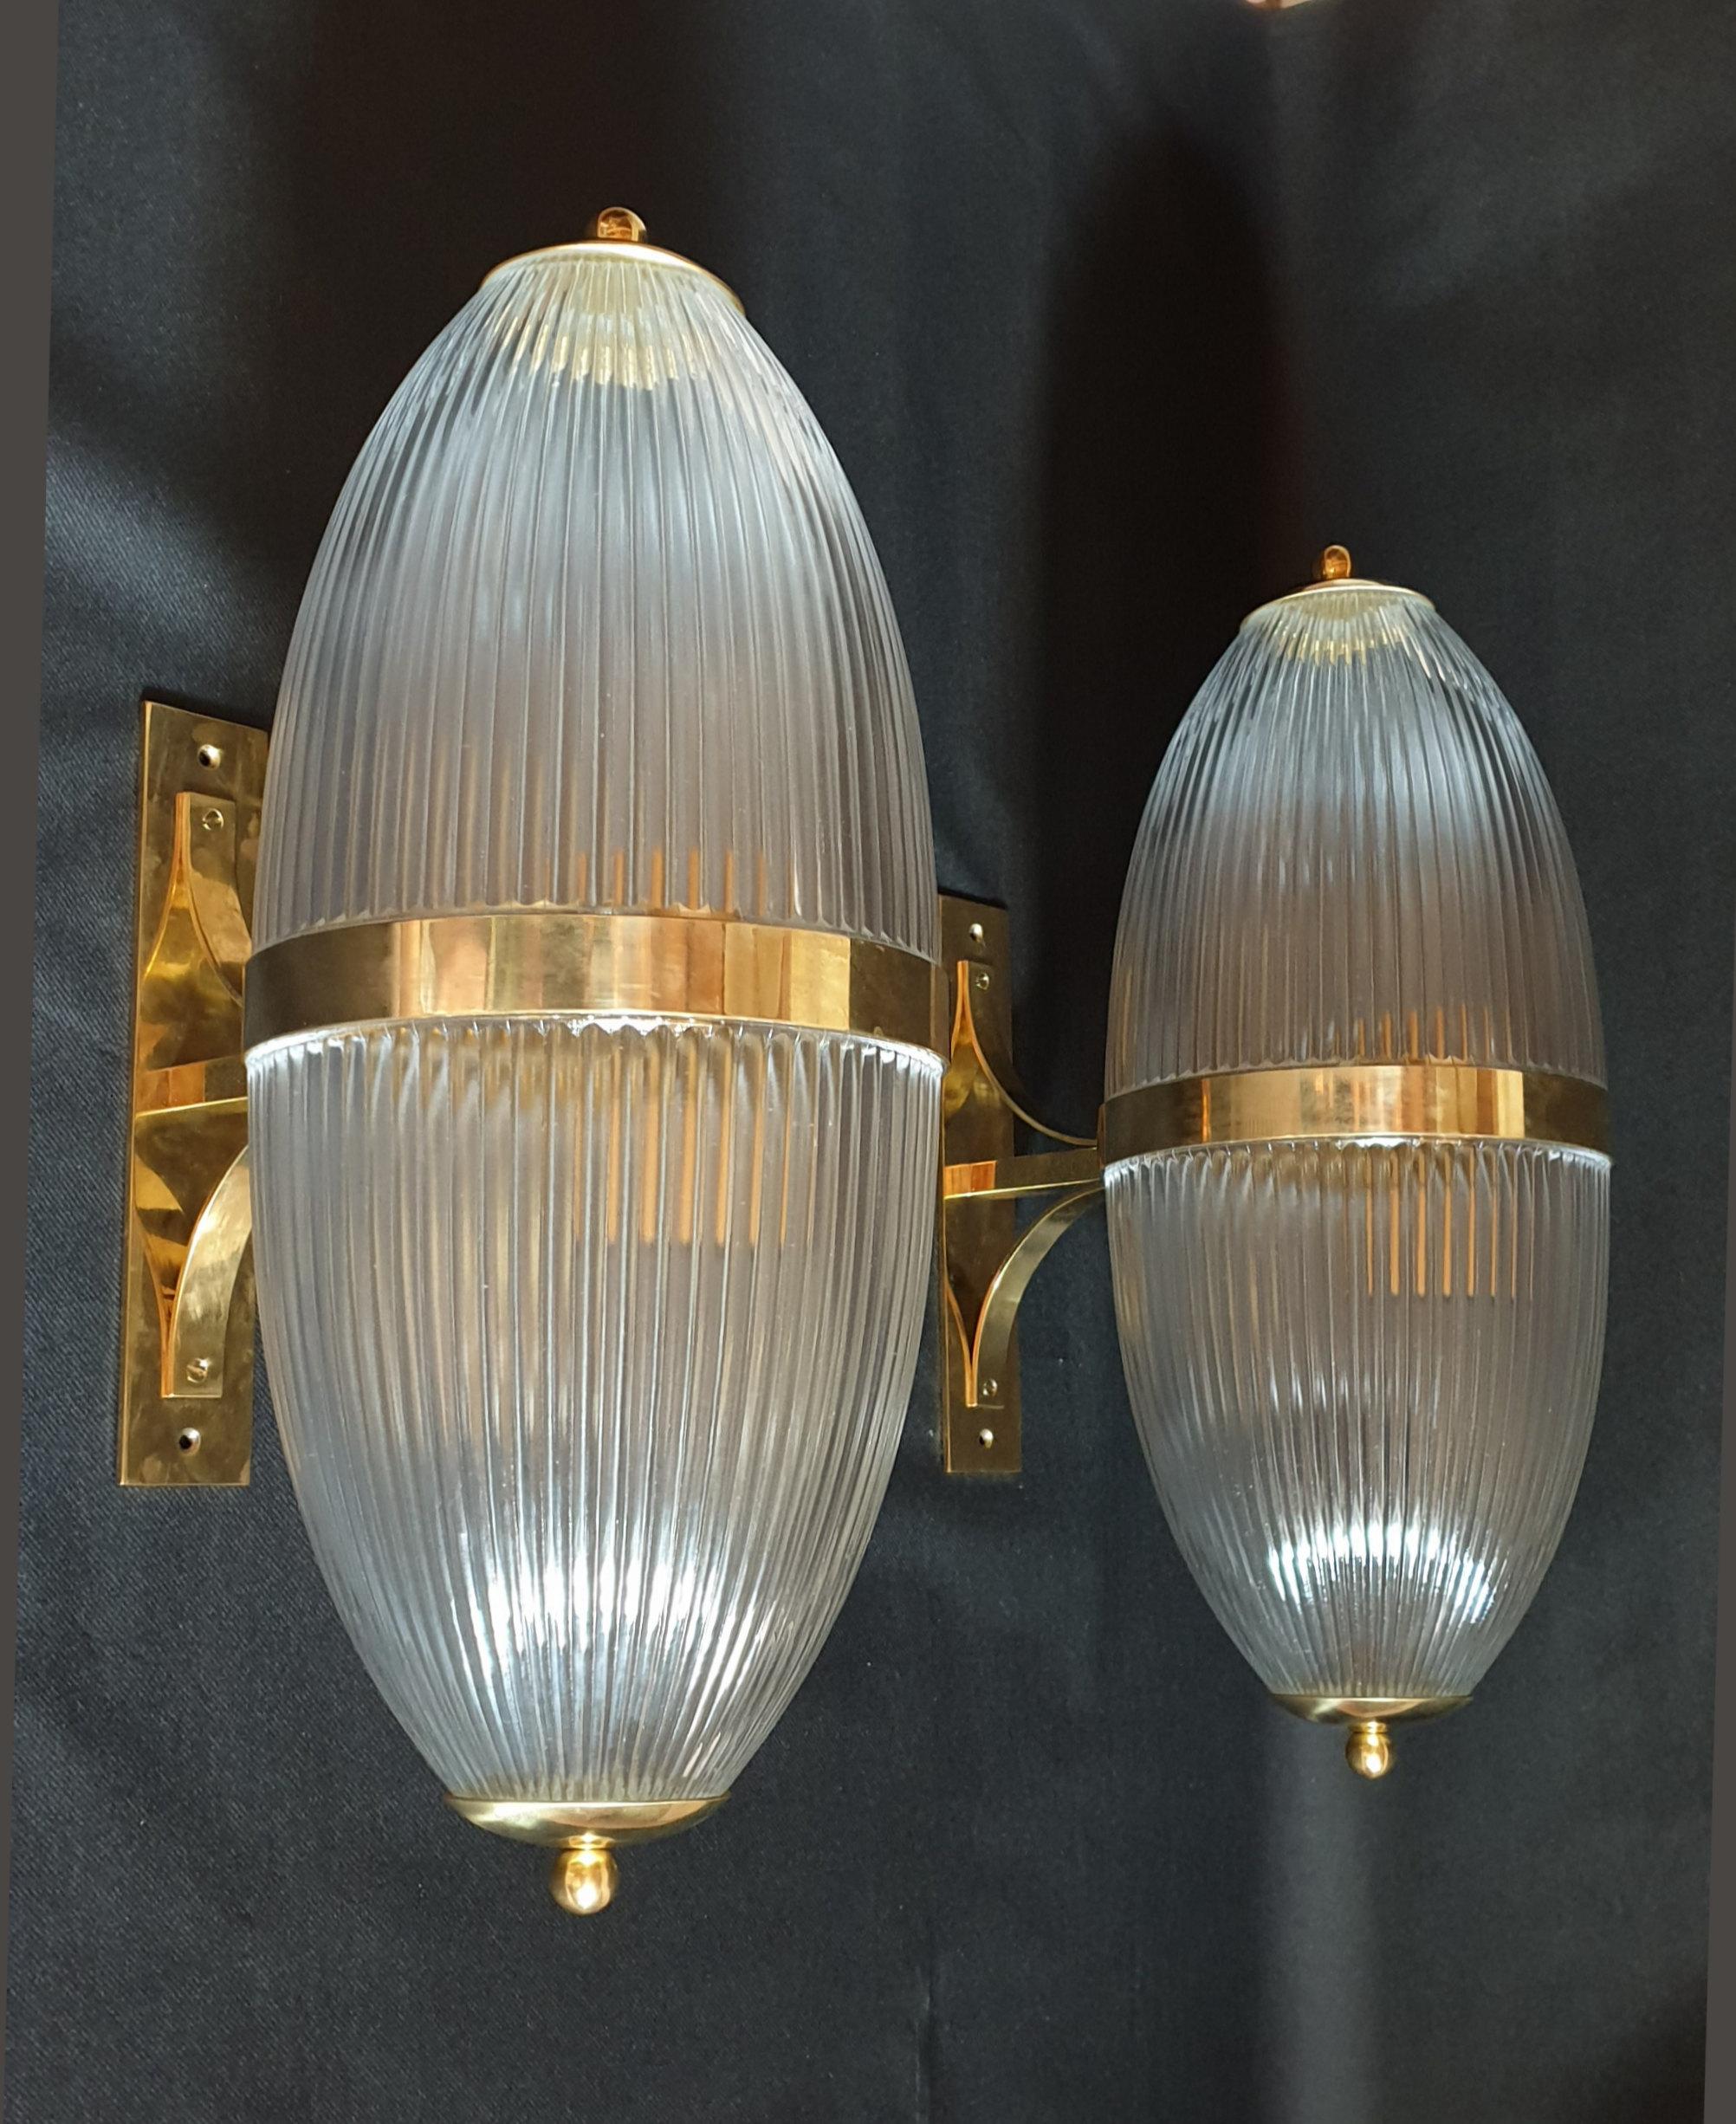 Pair of large Italian lanterns or wall sconces, in clear translucent glass and brass mounts, with an ovoid shape.
2 lights in each: one up, one down. Rewired for the US.
Attributed to Ignazio Gardella for Azucena, Italy, 1960s
Beautiful quality